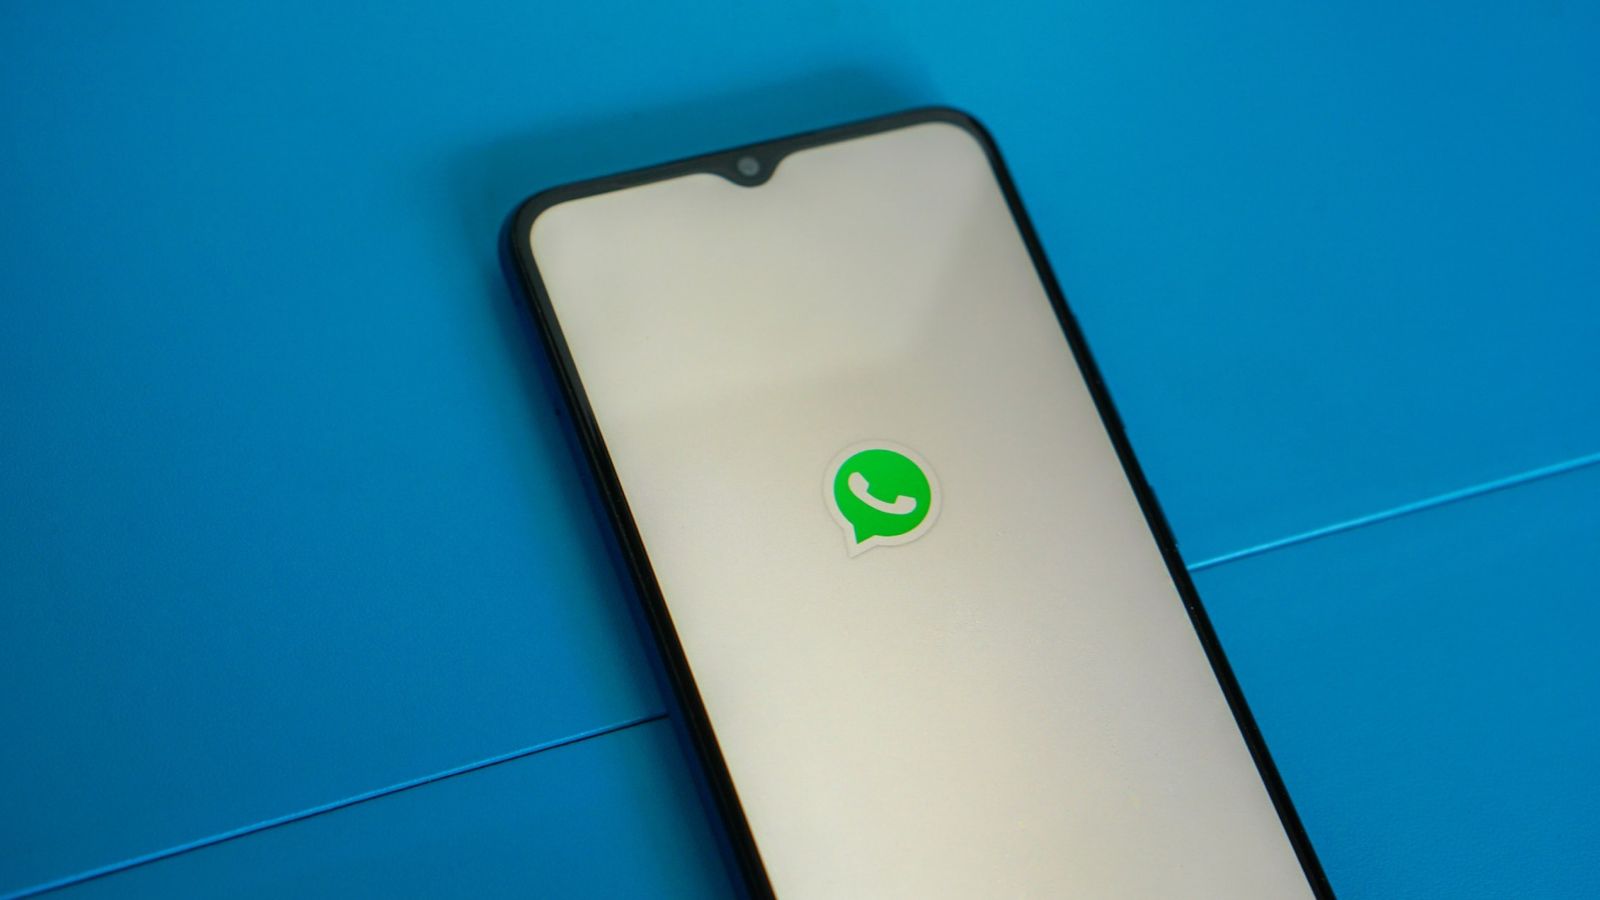 Disable WhatsApp encryption - An image of WhatsApp on a smartphone